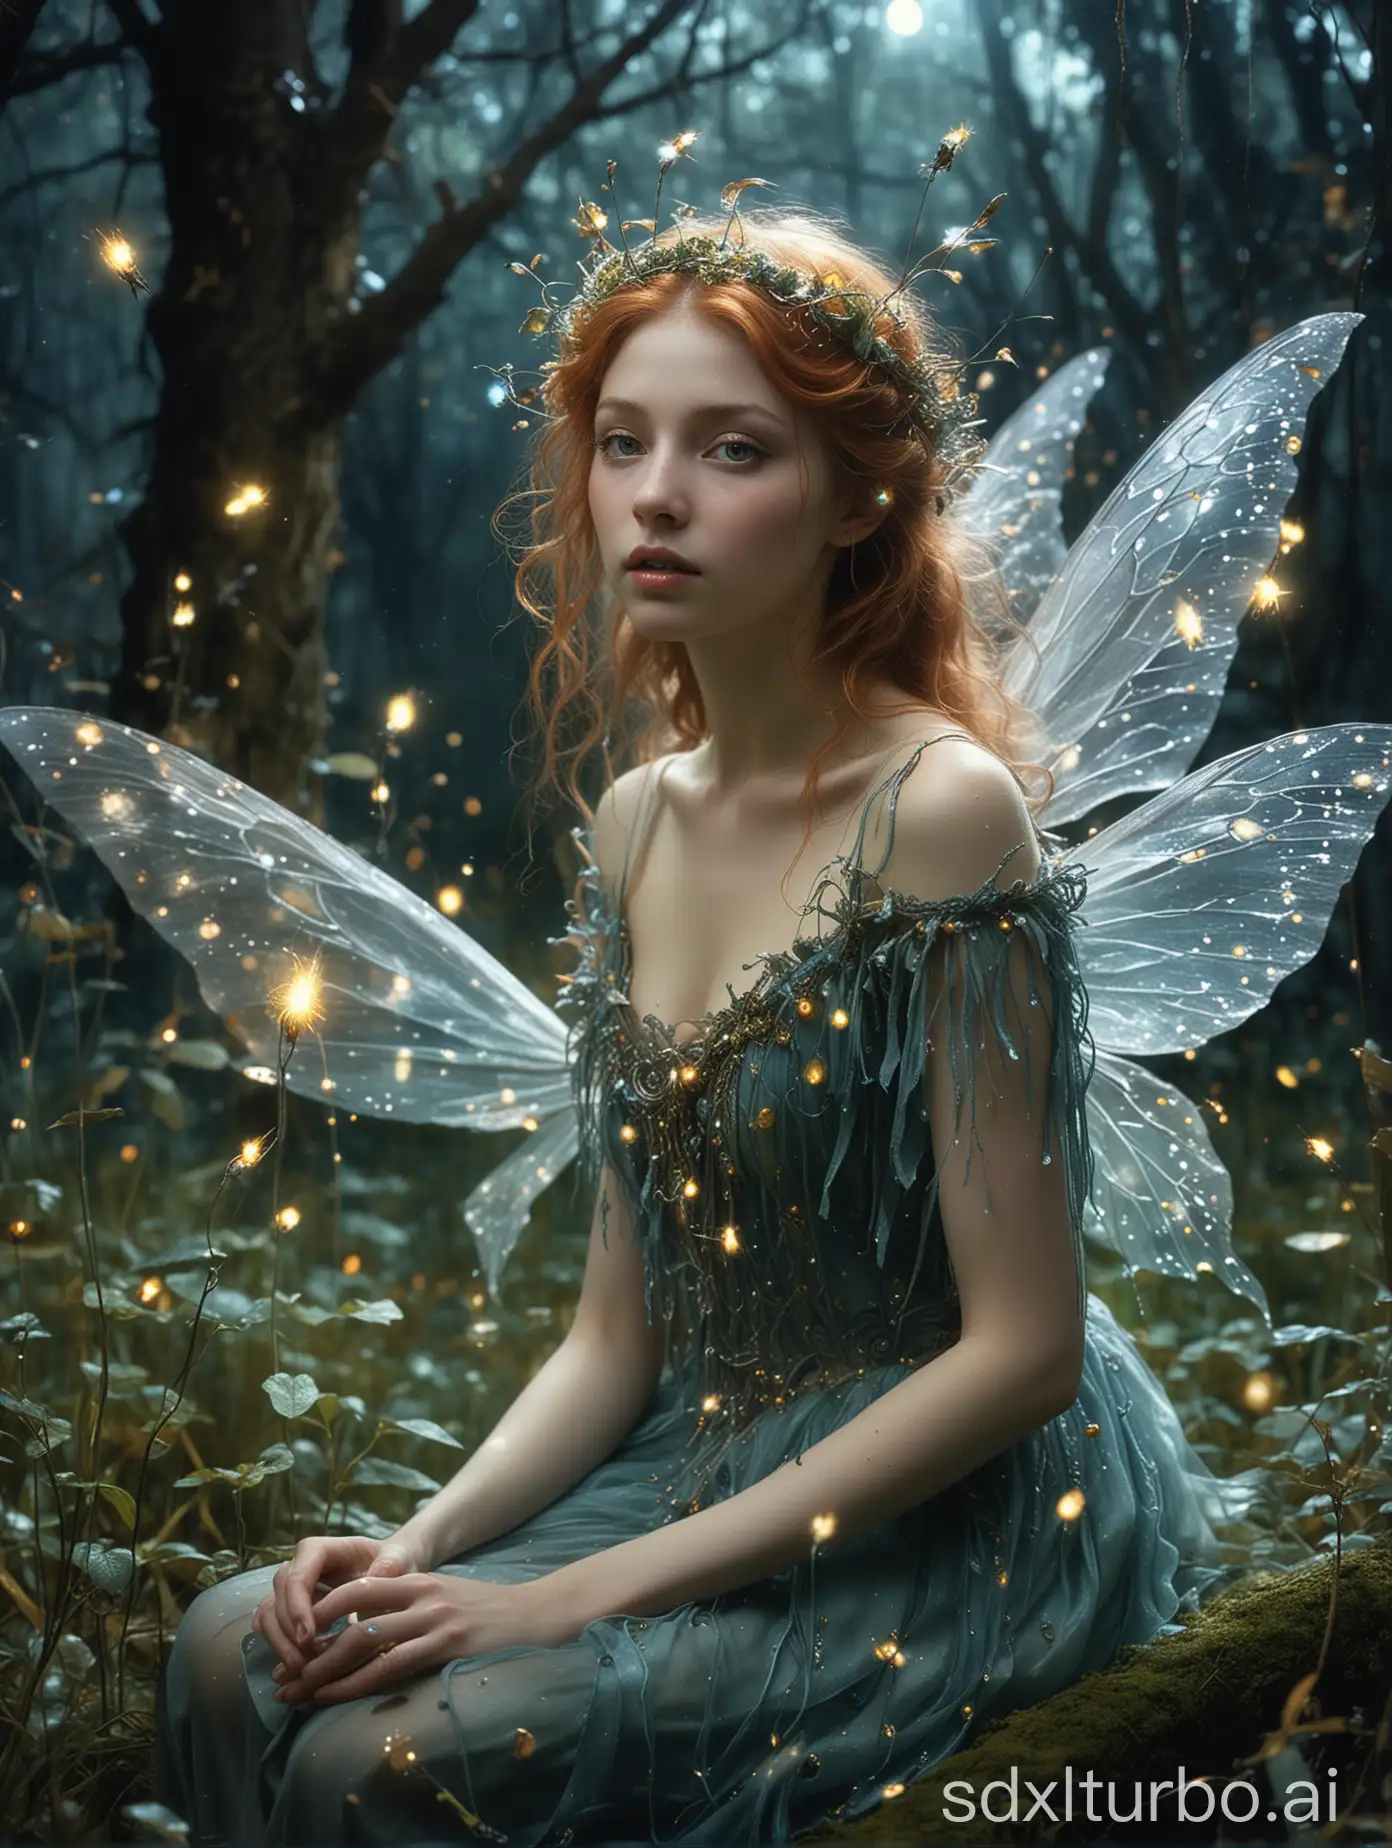 Enchanting-CloseUp-of-Surreal-Whimsical-Fairies-and-Eerie-Creatures-in-Dreamlike-Atmosphere